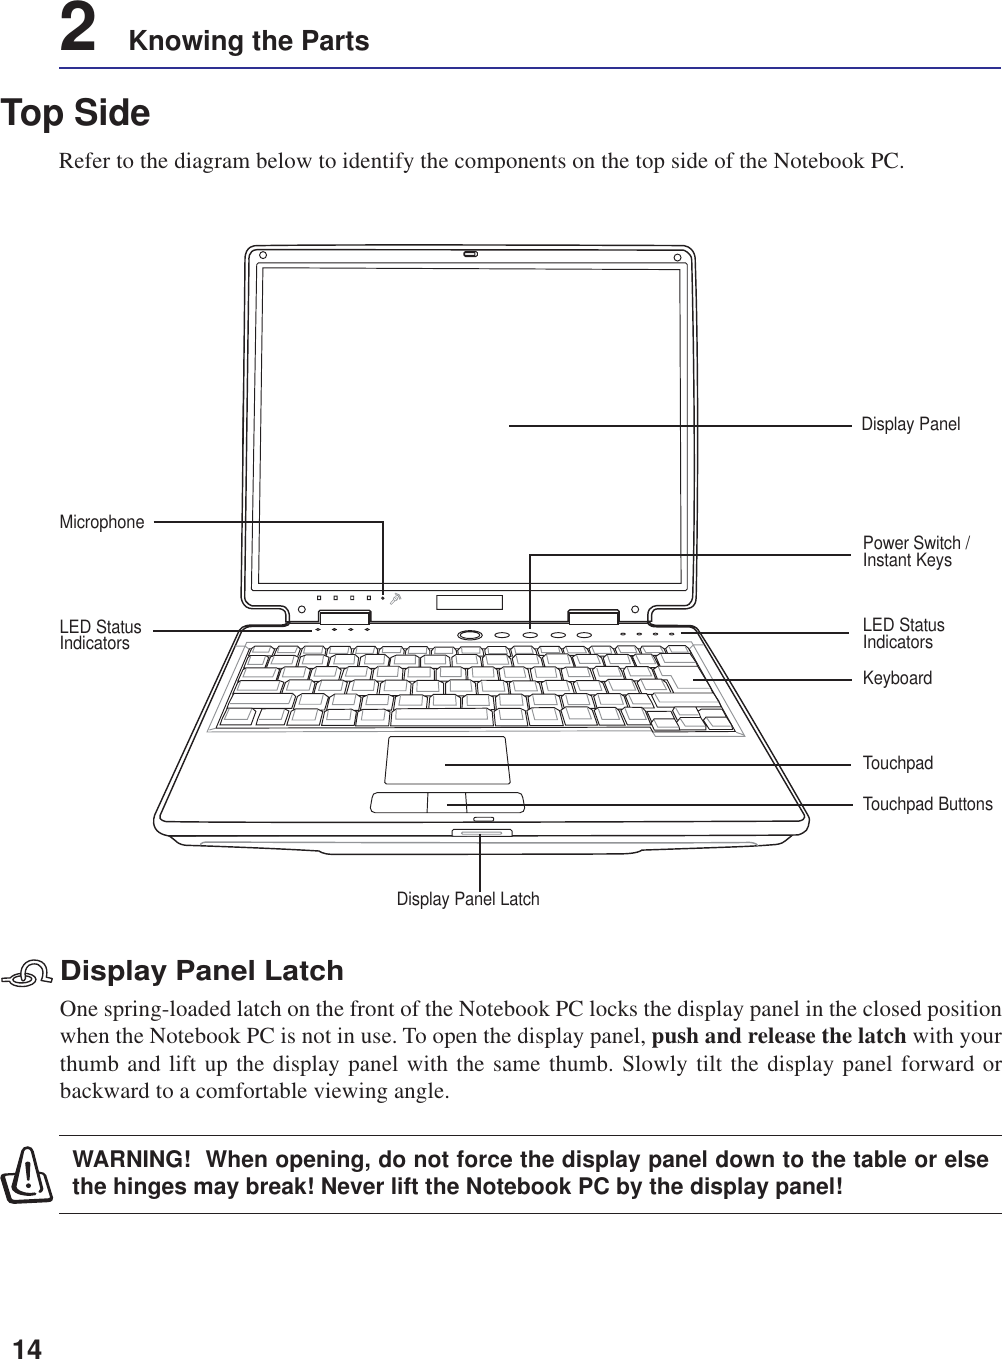 142    Knowing the PartsTop SideRefer to the diagram below to identify the components on the top side of the Notebook PC.Display PanelTouchpad ButtonsKeyboardTouchpadPower Switch /Instant KeysLED StatusIndicatorsMicrophoneDisplay Panel LatchOne spring-loaded latch on the front of the Notebook PC locks the display panel in the closed positionwhen the Notebook PC is not in use. To open the display panel, push and release the latch with yourthumb and lift up the display panel with the same thumb. Slowly tilt the display panel forward orbackward to a comfortable viewing angle.WARNING!  When opening, do not force the display panel down to the table or elsethe hinges may break! Never lift the Notebook PC by the display panel!Display Panel LatchLED StatusIndicators